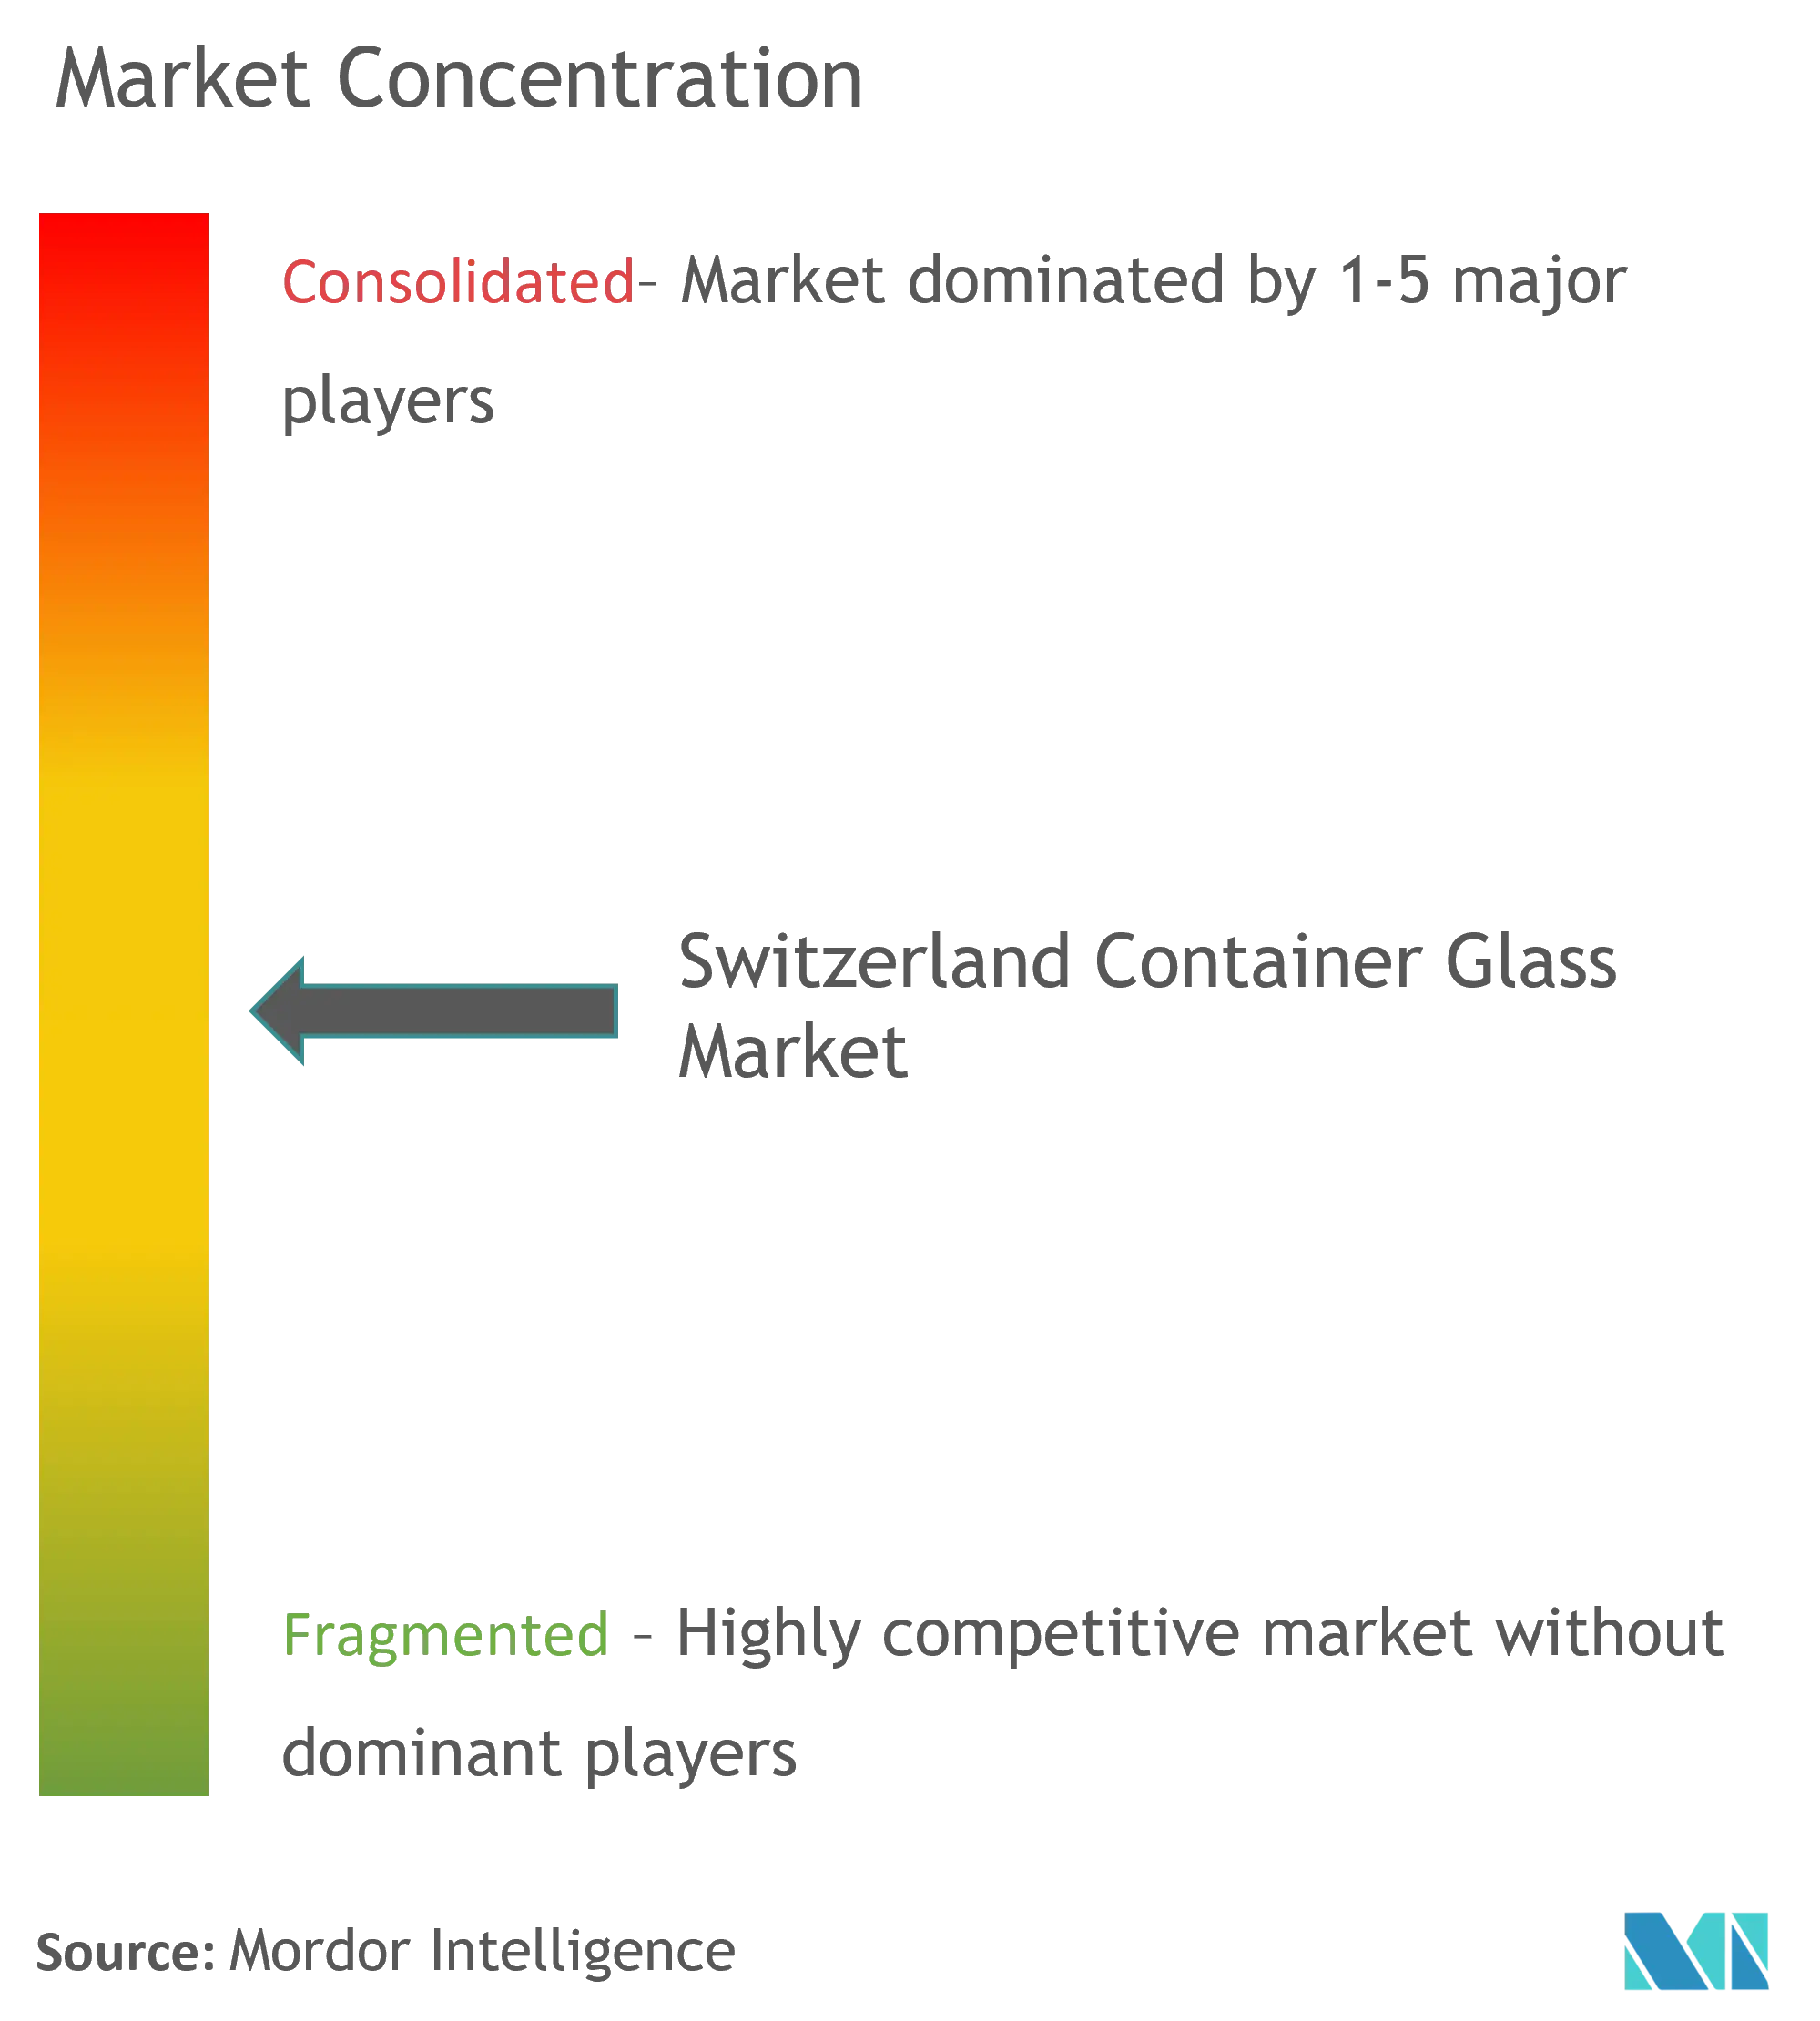 Switzerland Container Glass Market Concentration